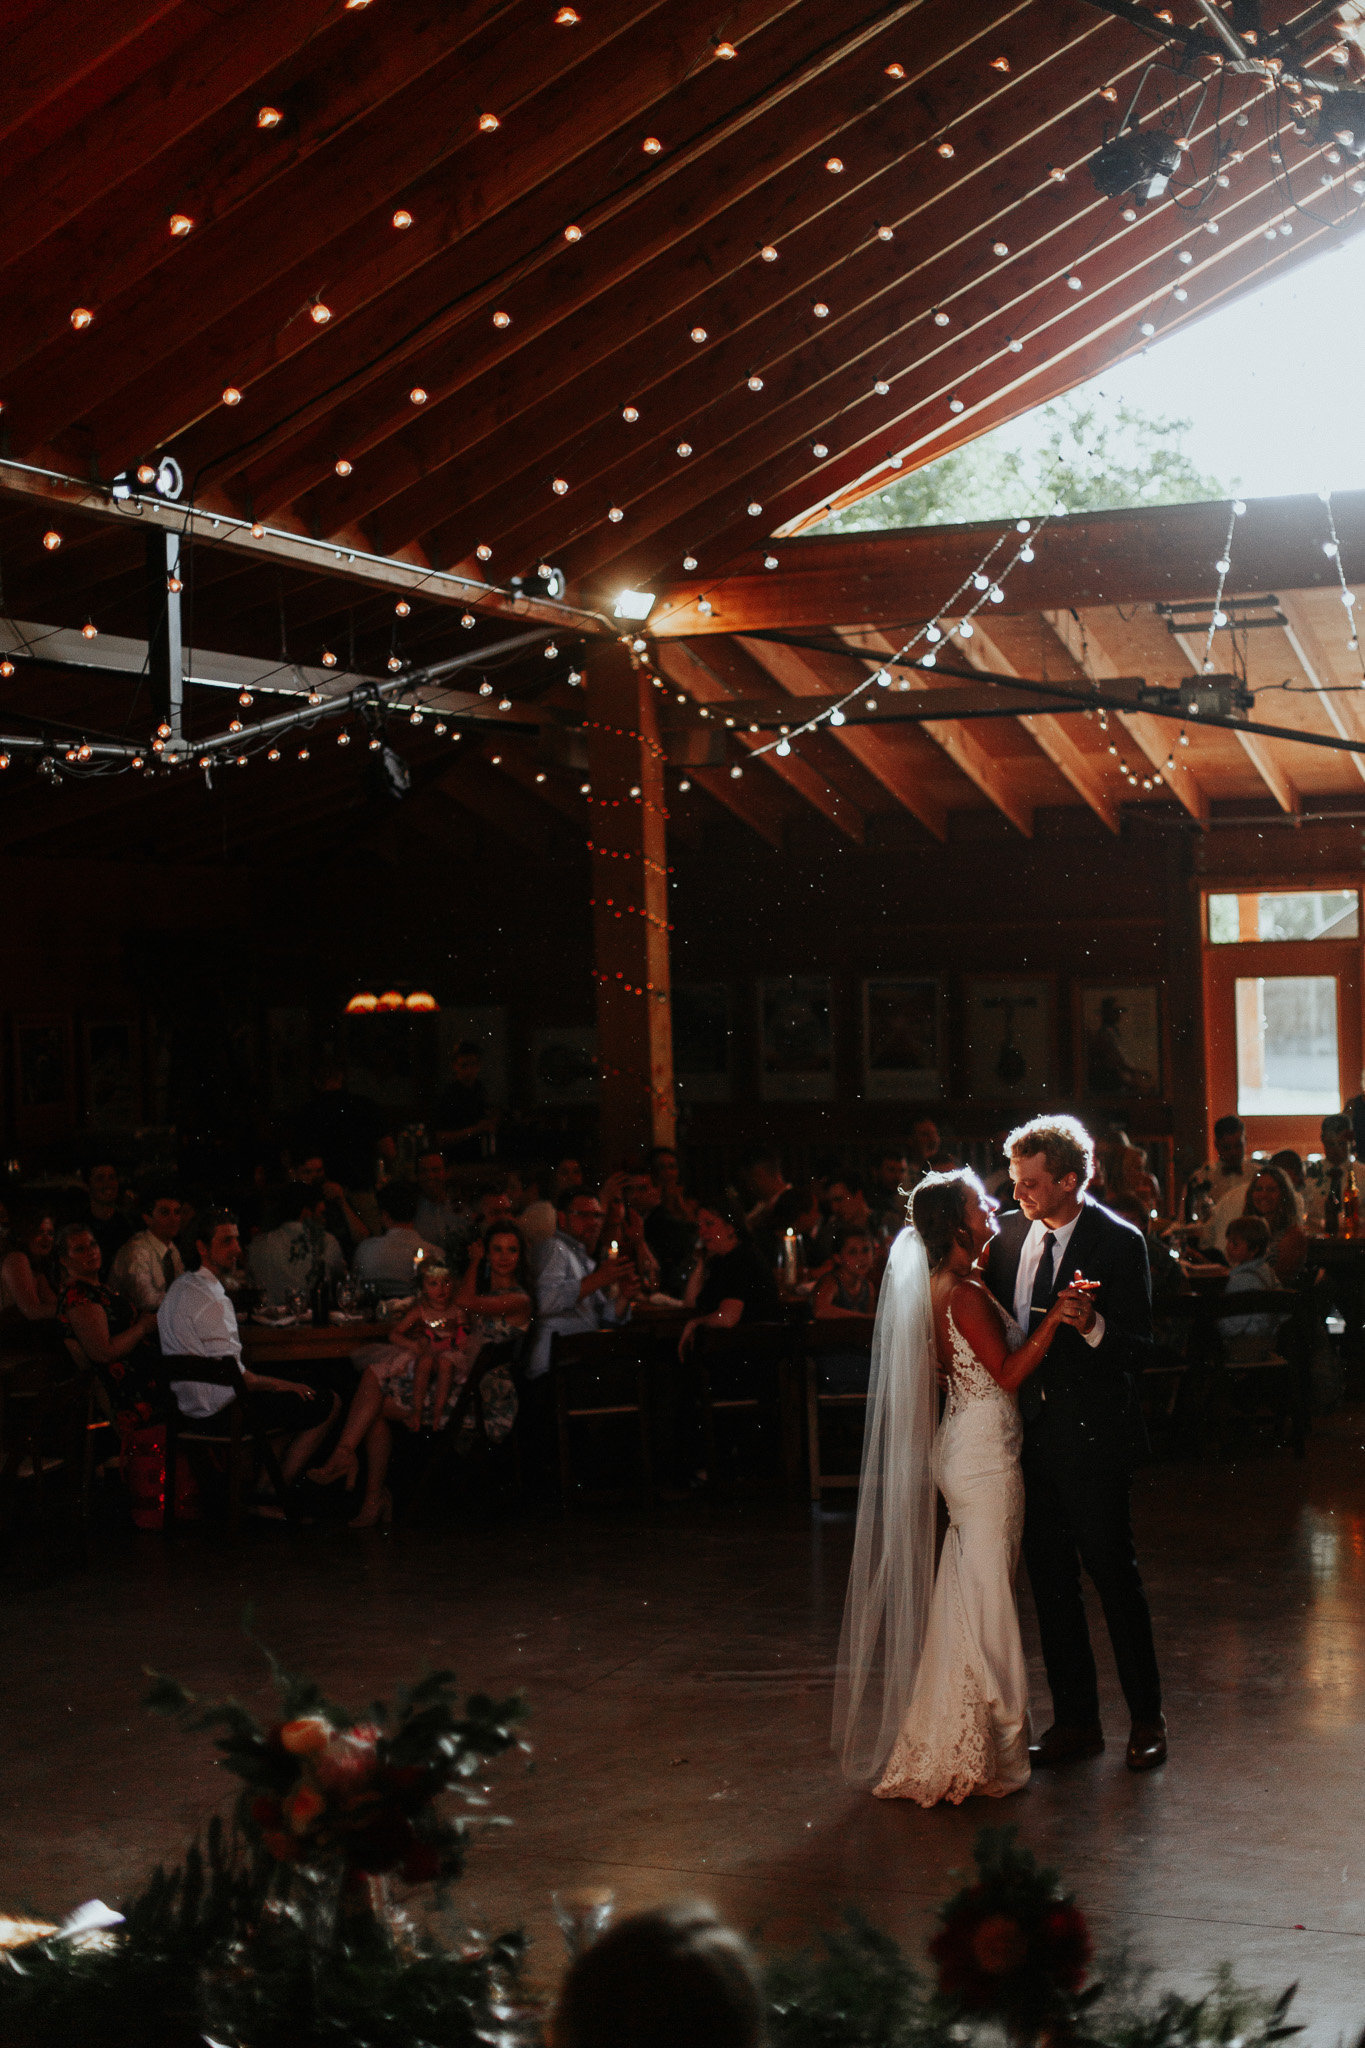 plante bluegrass barn, bride and groom having their first dance.